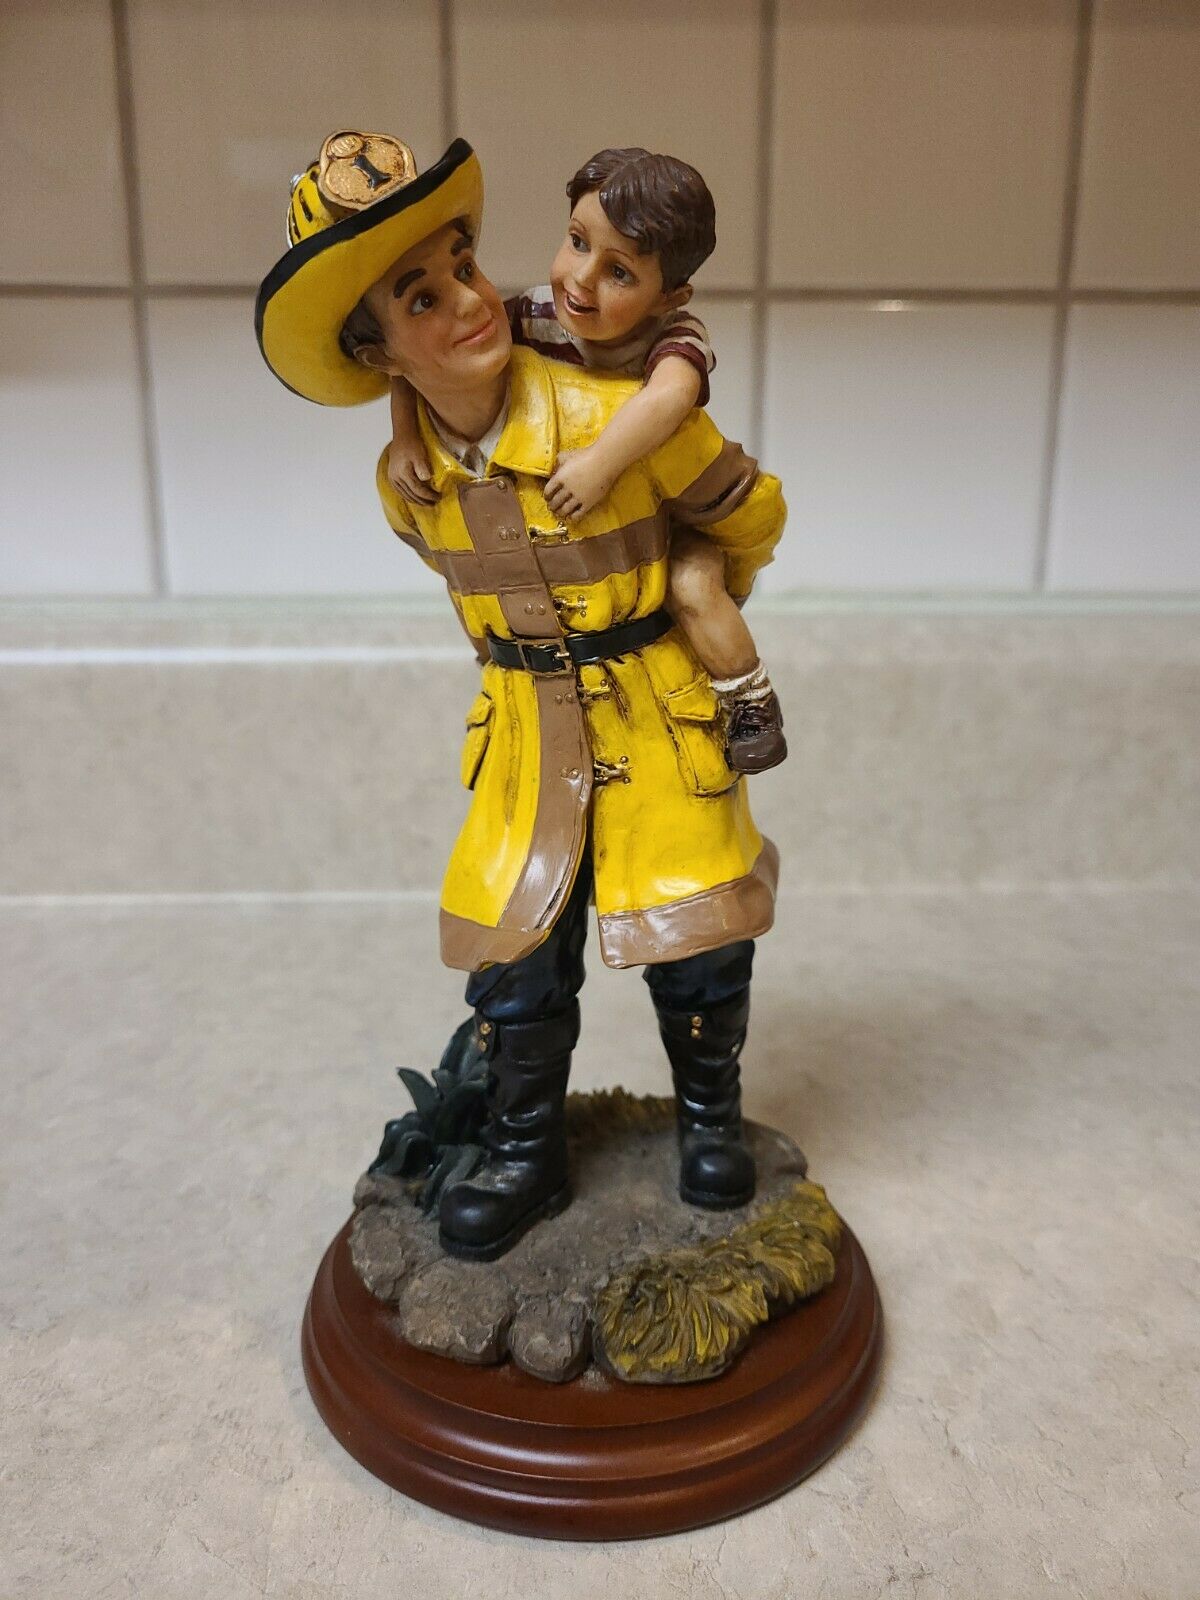 Vanmark Red Hats Of Courage Beyond The Call Lean On Me 1998 Fireman Figurine